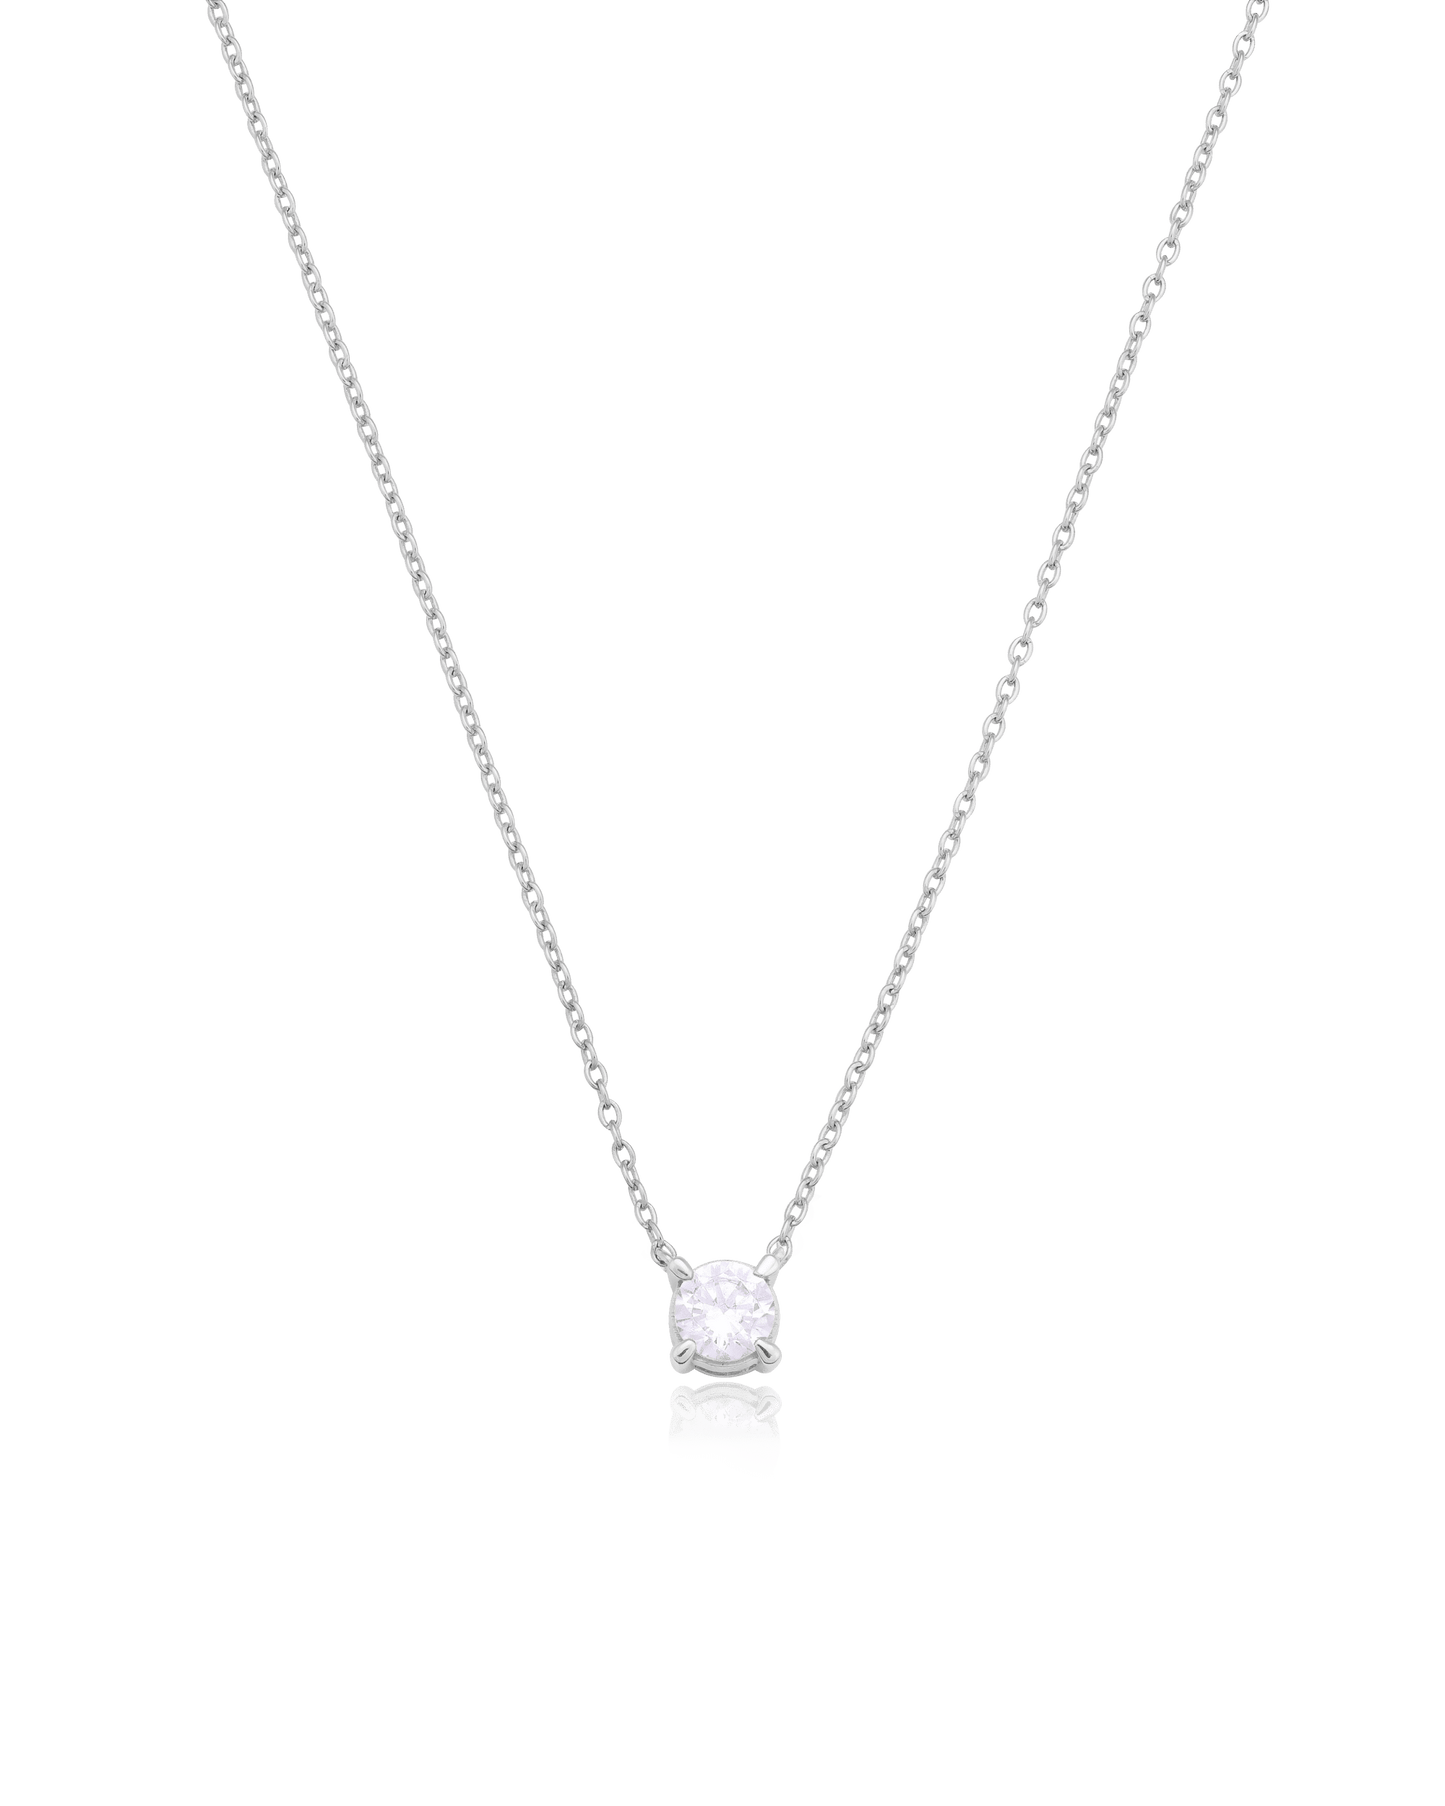 Diamond Solitaire Necklace - 14K Yellow Gold Necklaces magal-dev 